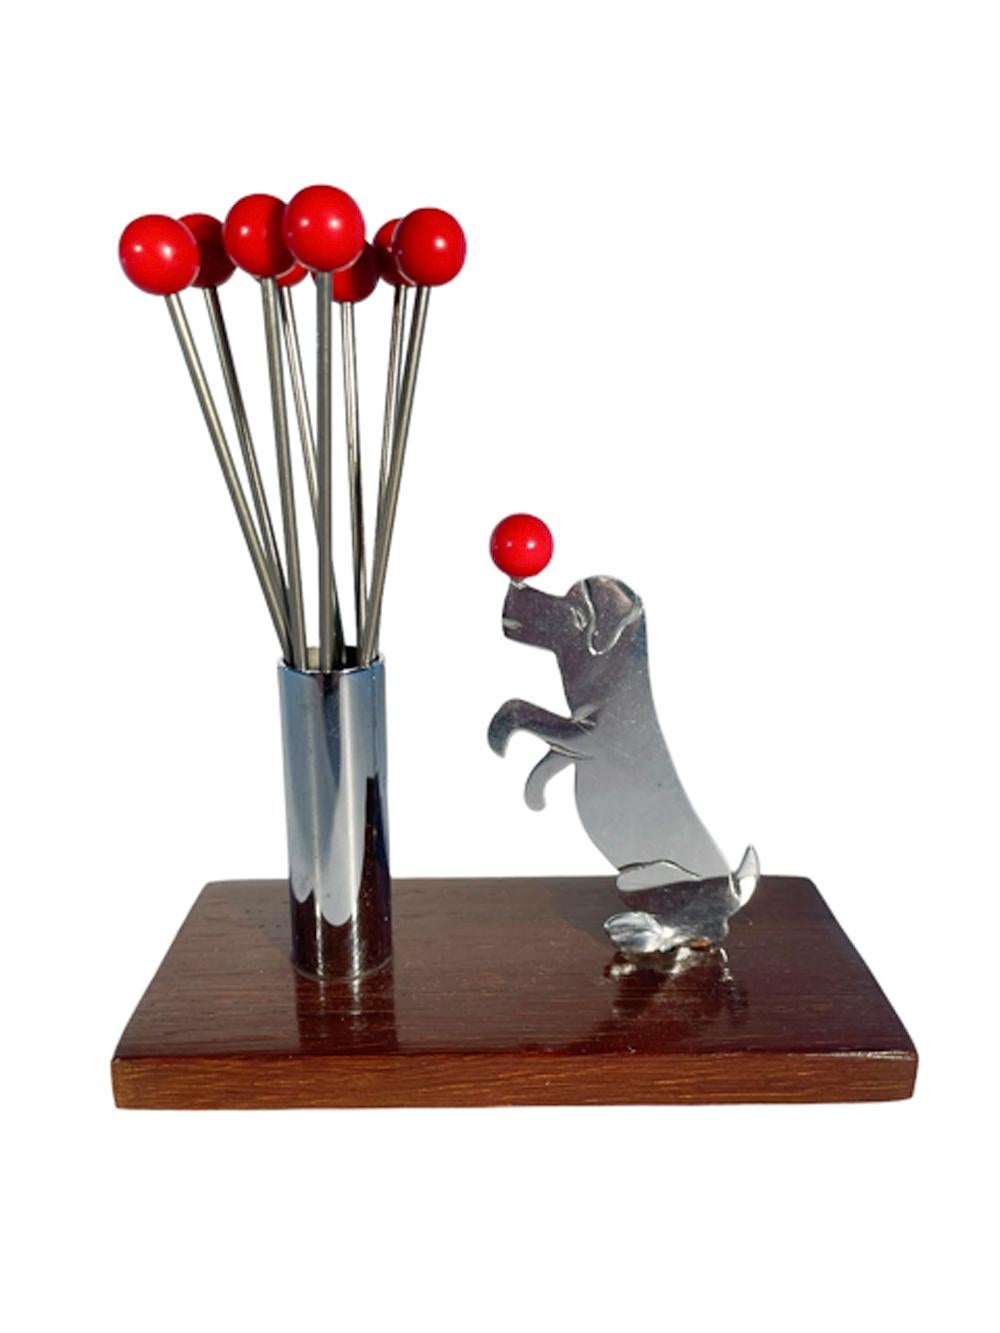 20th Century Art Deco Set of Eight Cocktail Picks with a Dog Balancing a Ball on Its Nose